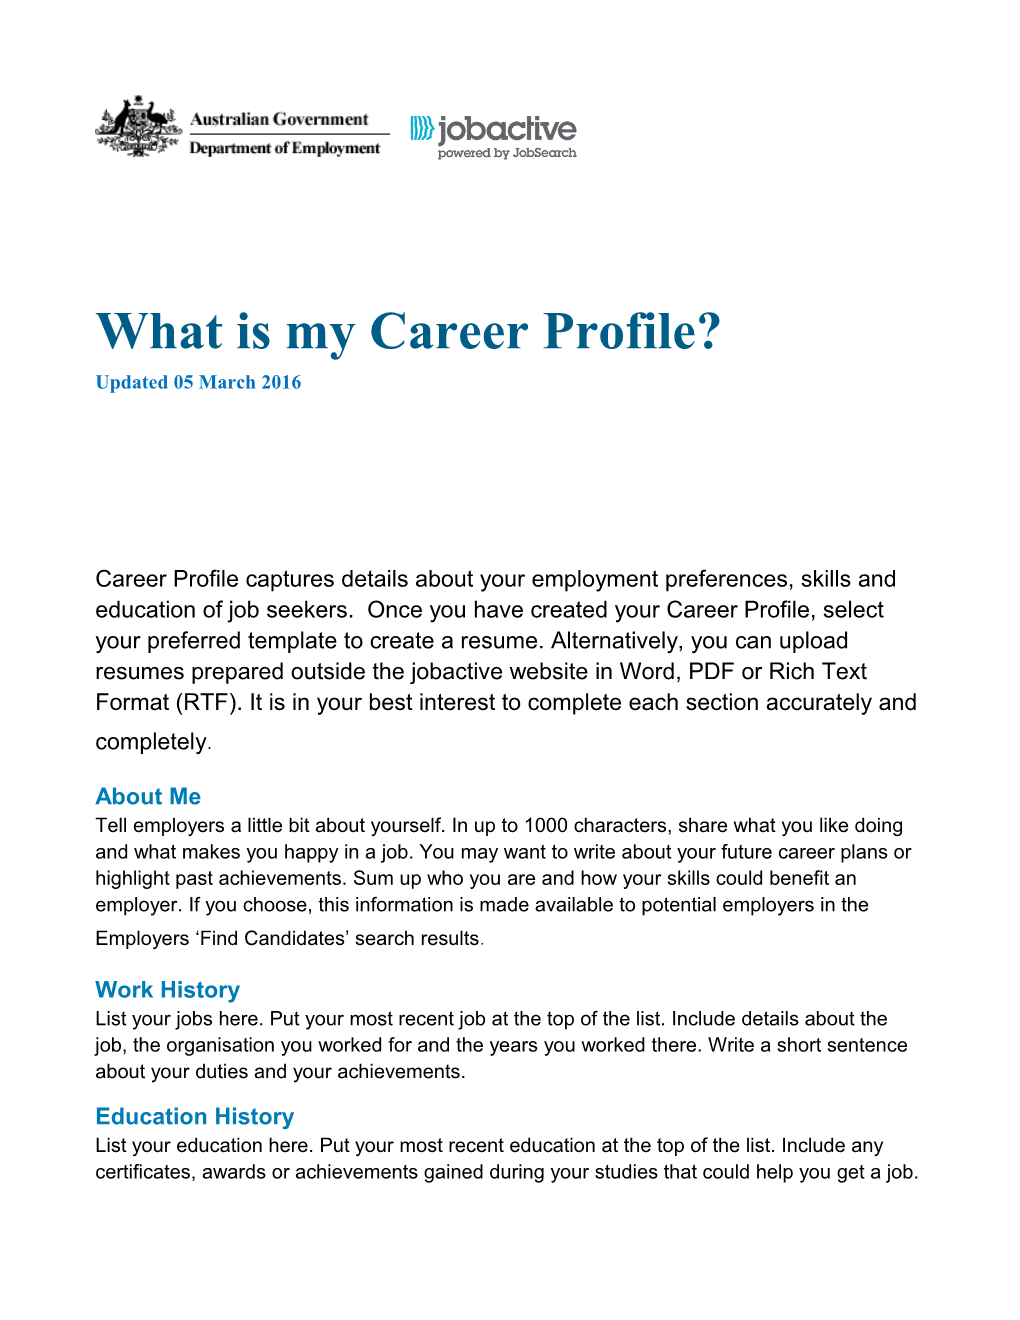 What Is My Career Profile?